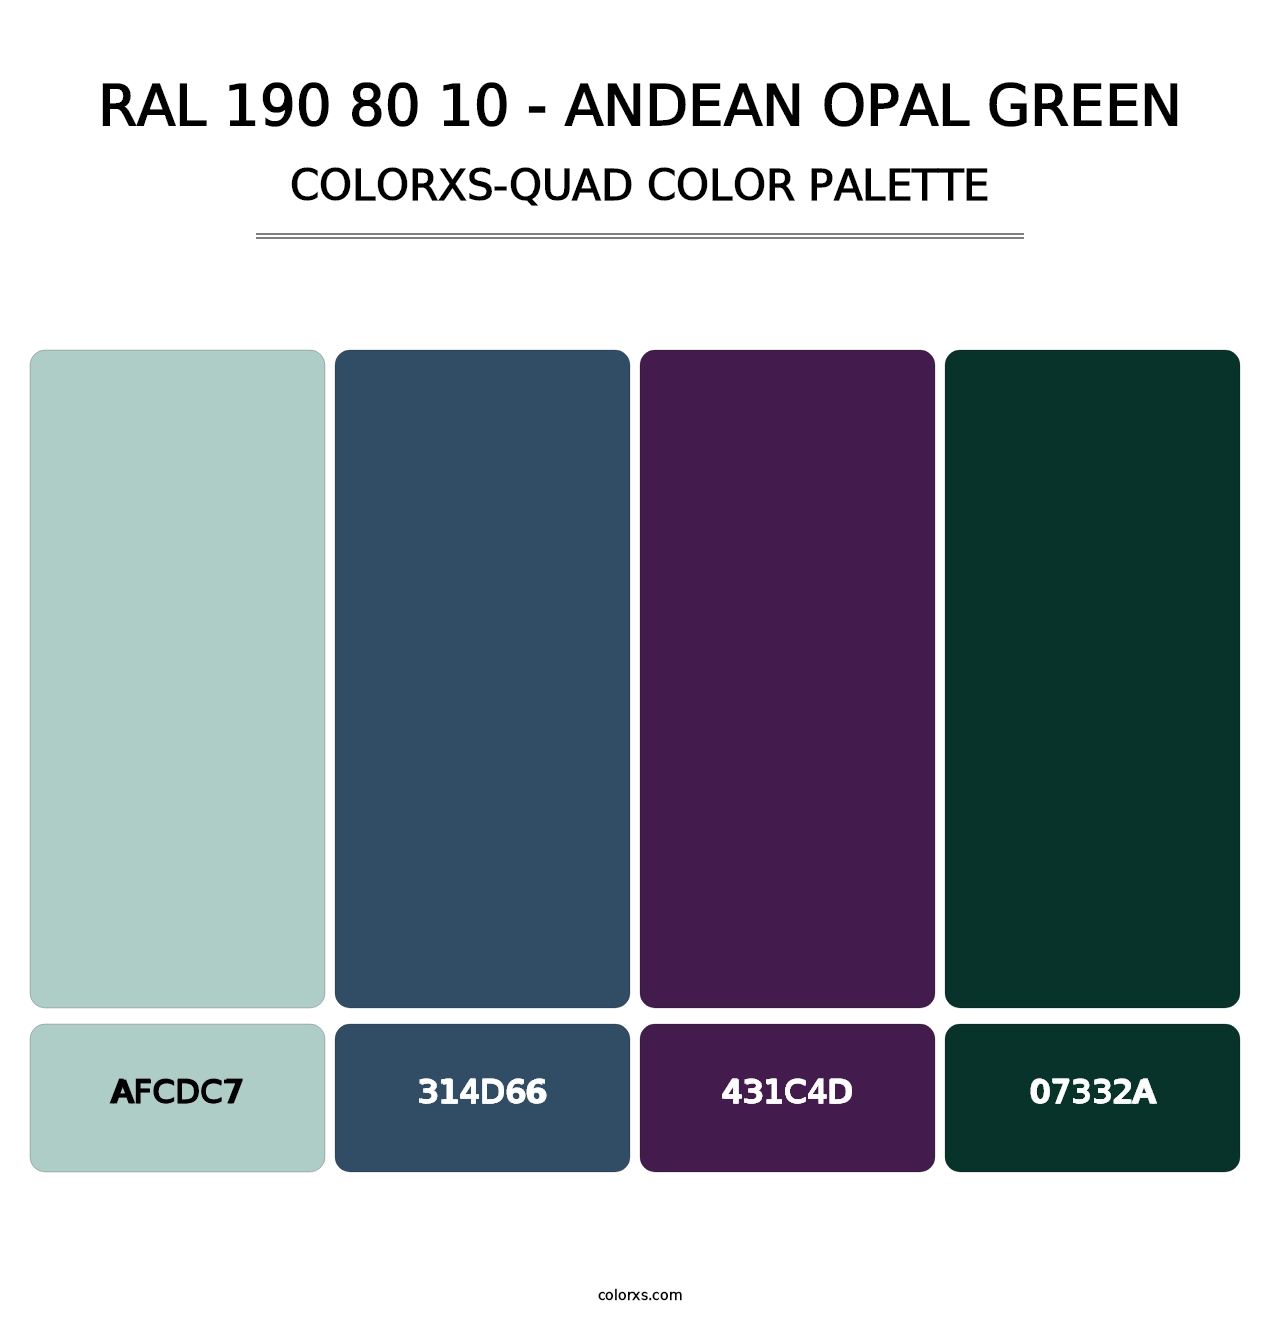 RAL 190 80 10 - Andean Opal Green - Colorxs Quad Palette